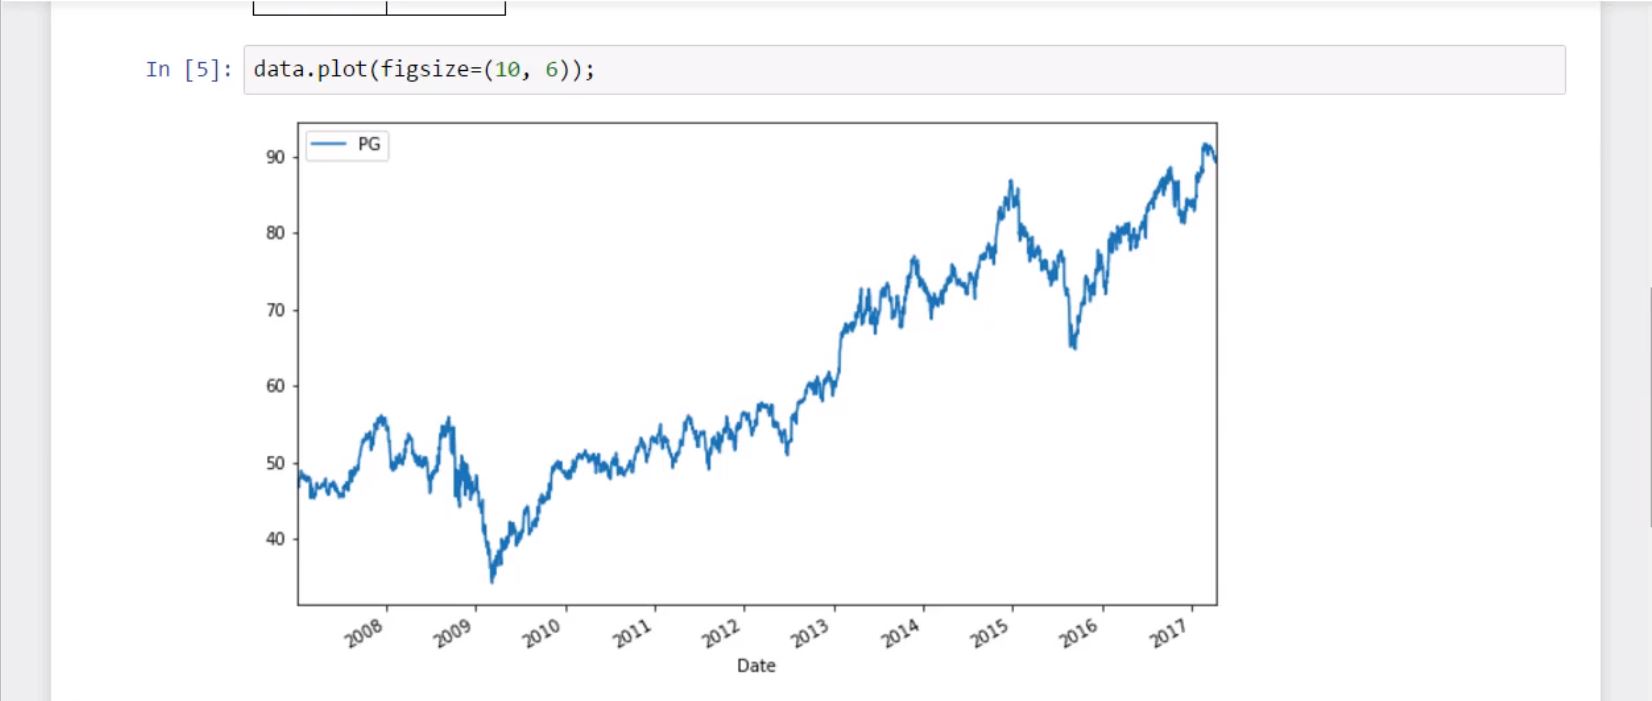 How To Apply Monte Carlo Simulation To Forecast Stock Prices Using Python DataScience 